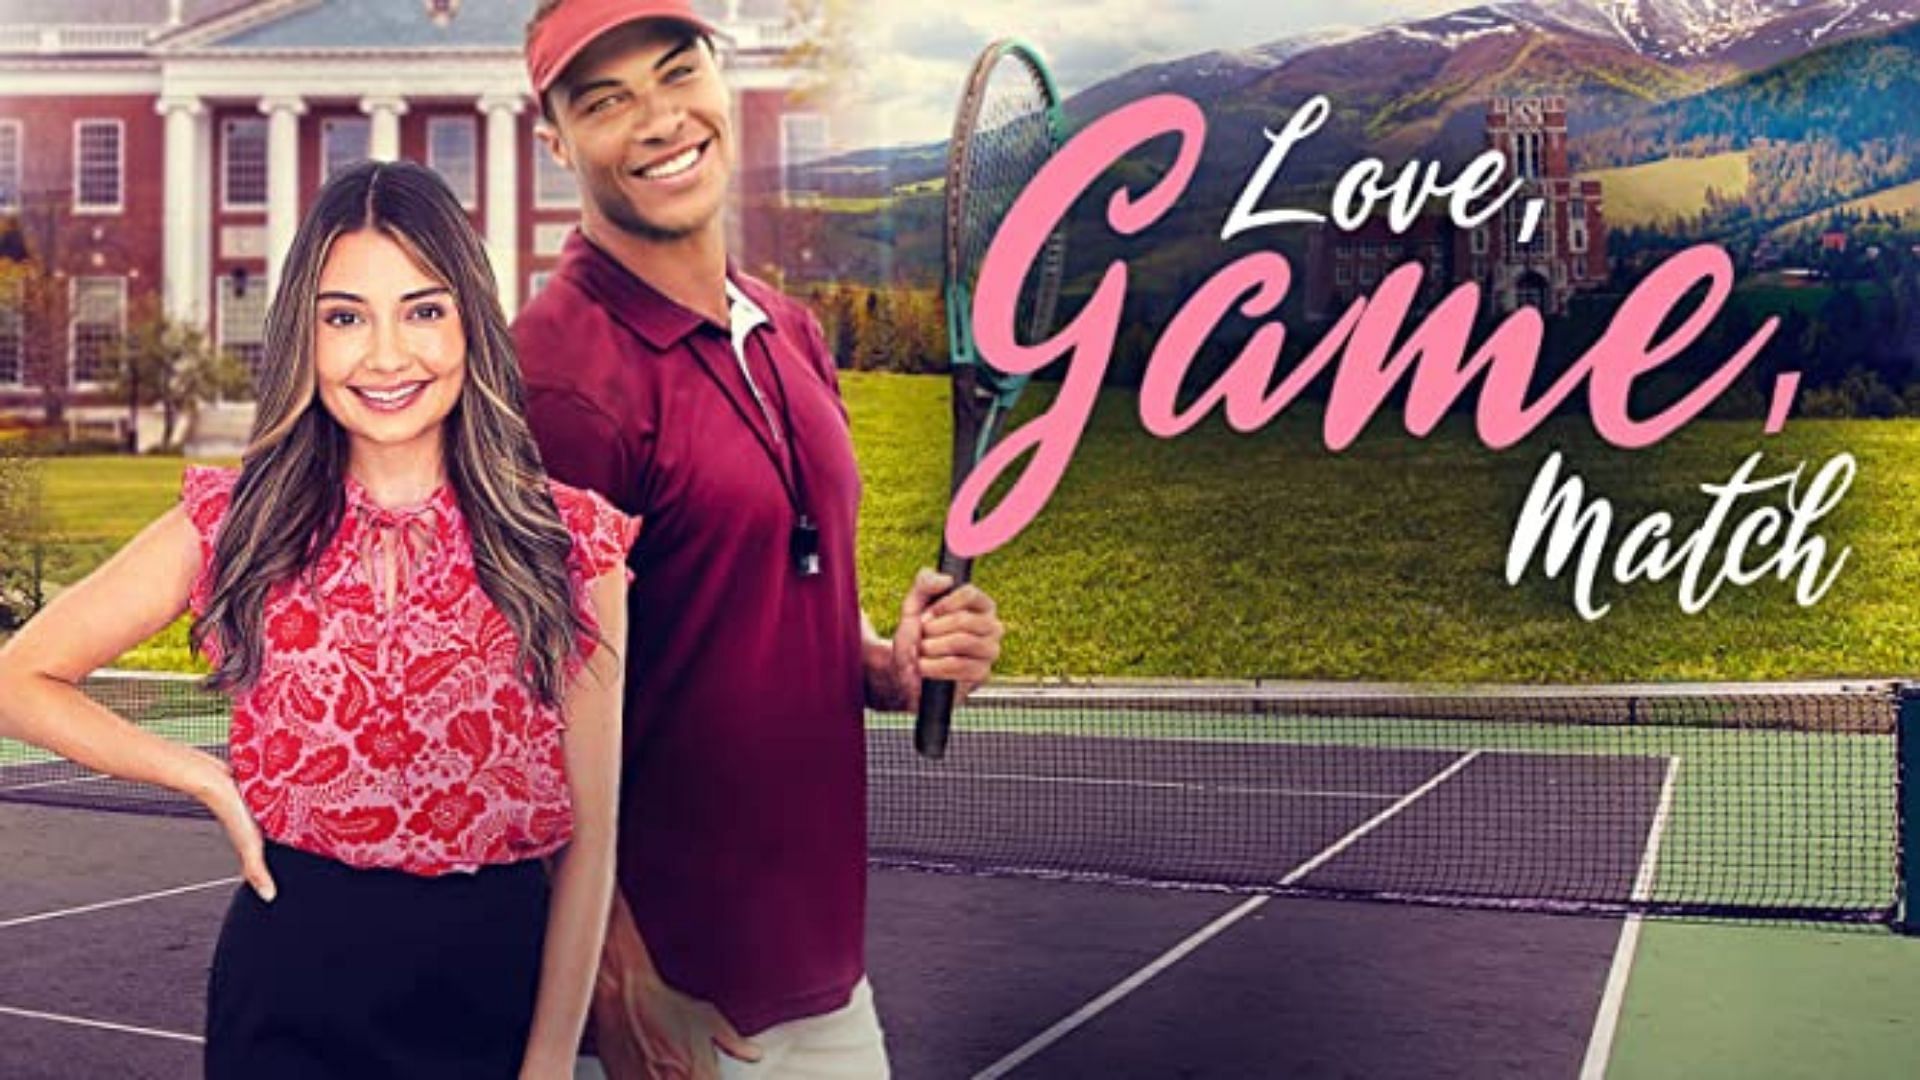 Love, Game, Match official poster (Image via Amazon)